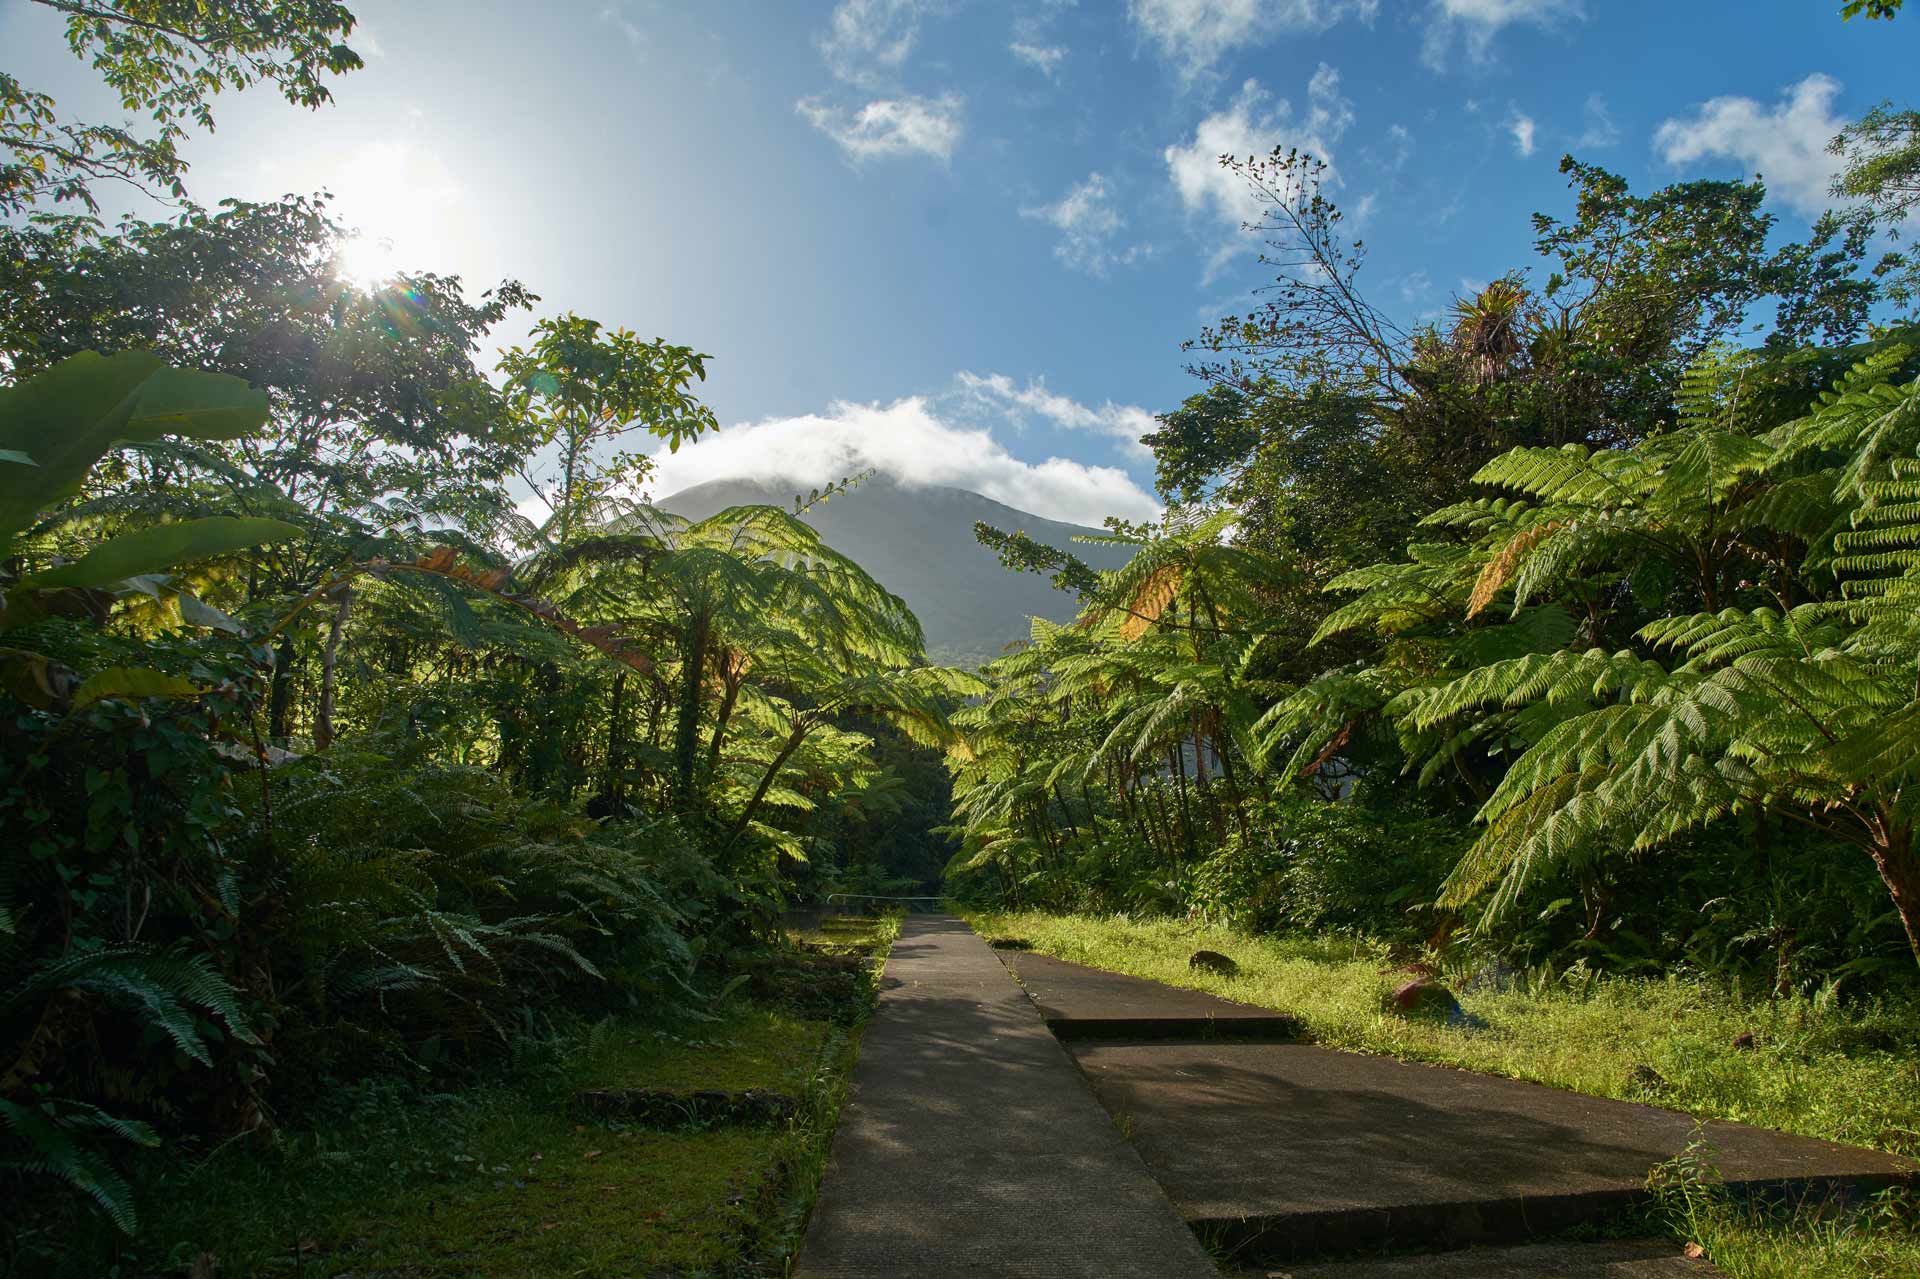 Scene with different jungle plants, a mountain and blue sky in the background